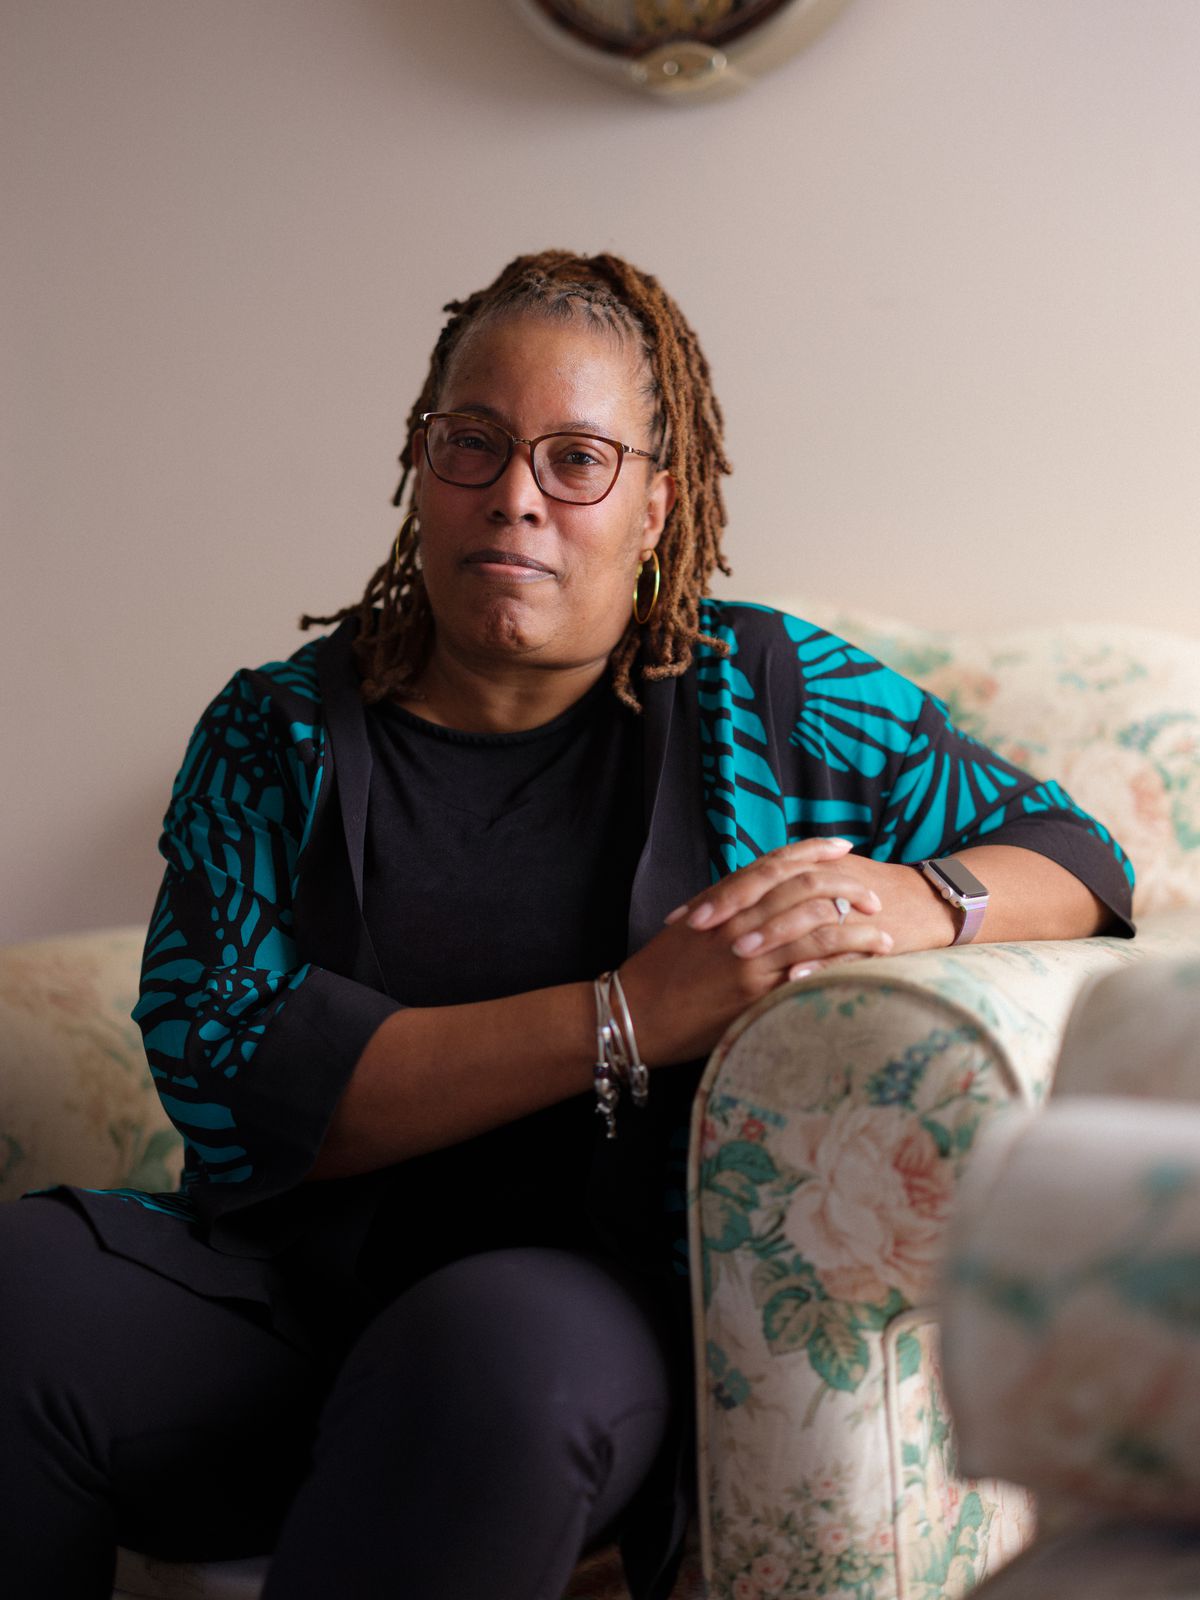 A Black woman sits on a cream floral-patterned couch, wearing a teal and black sweater and glasses.